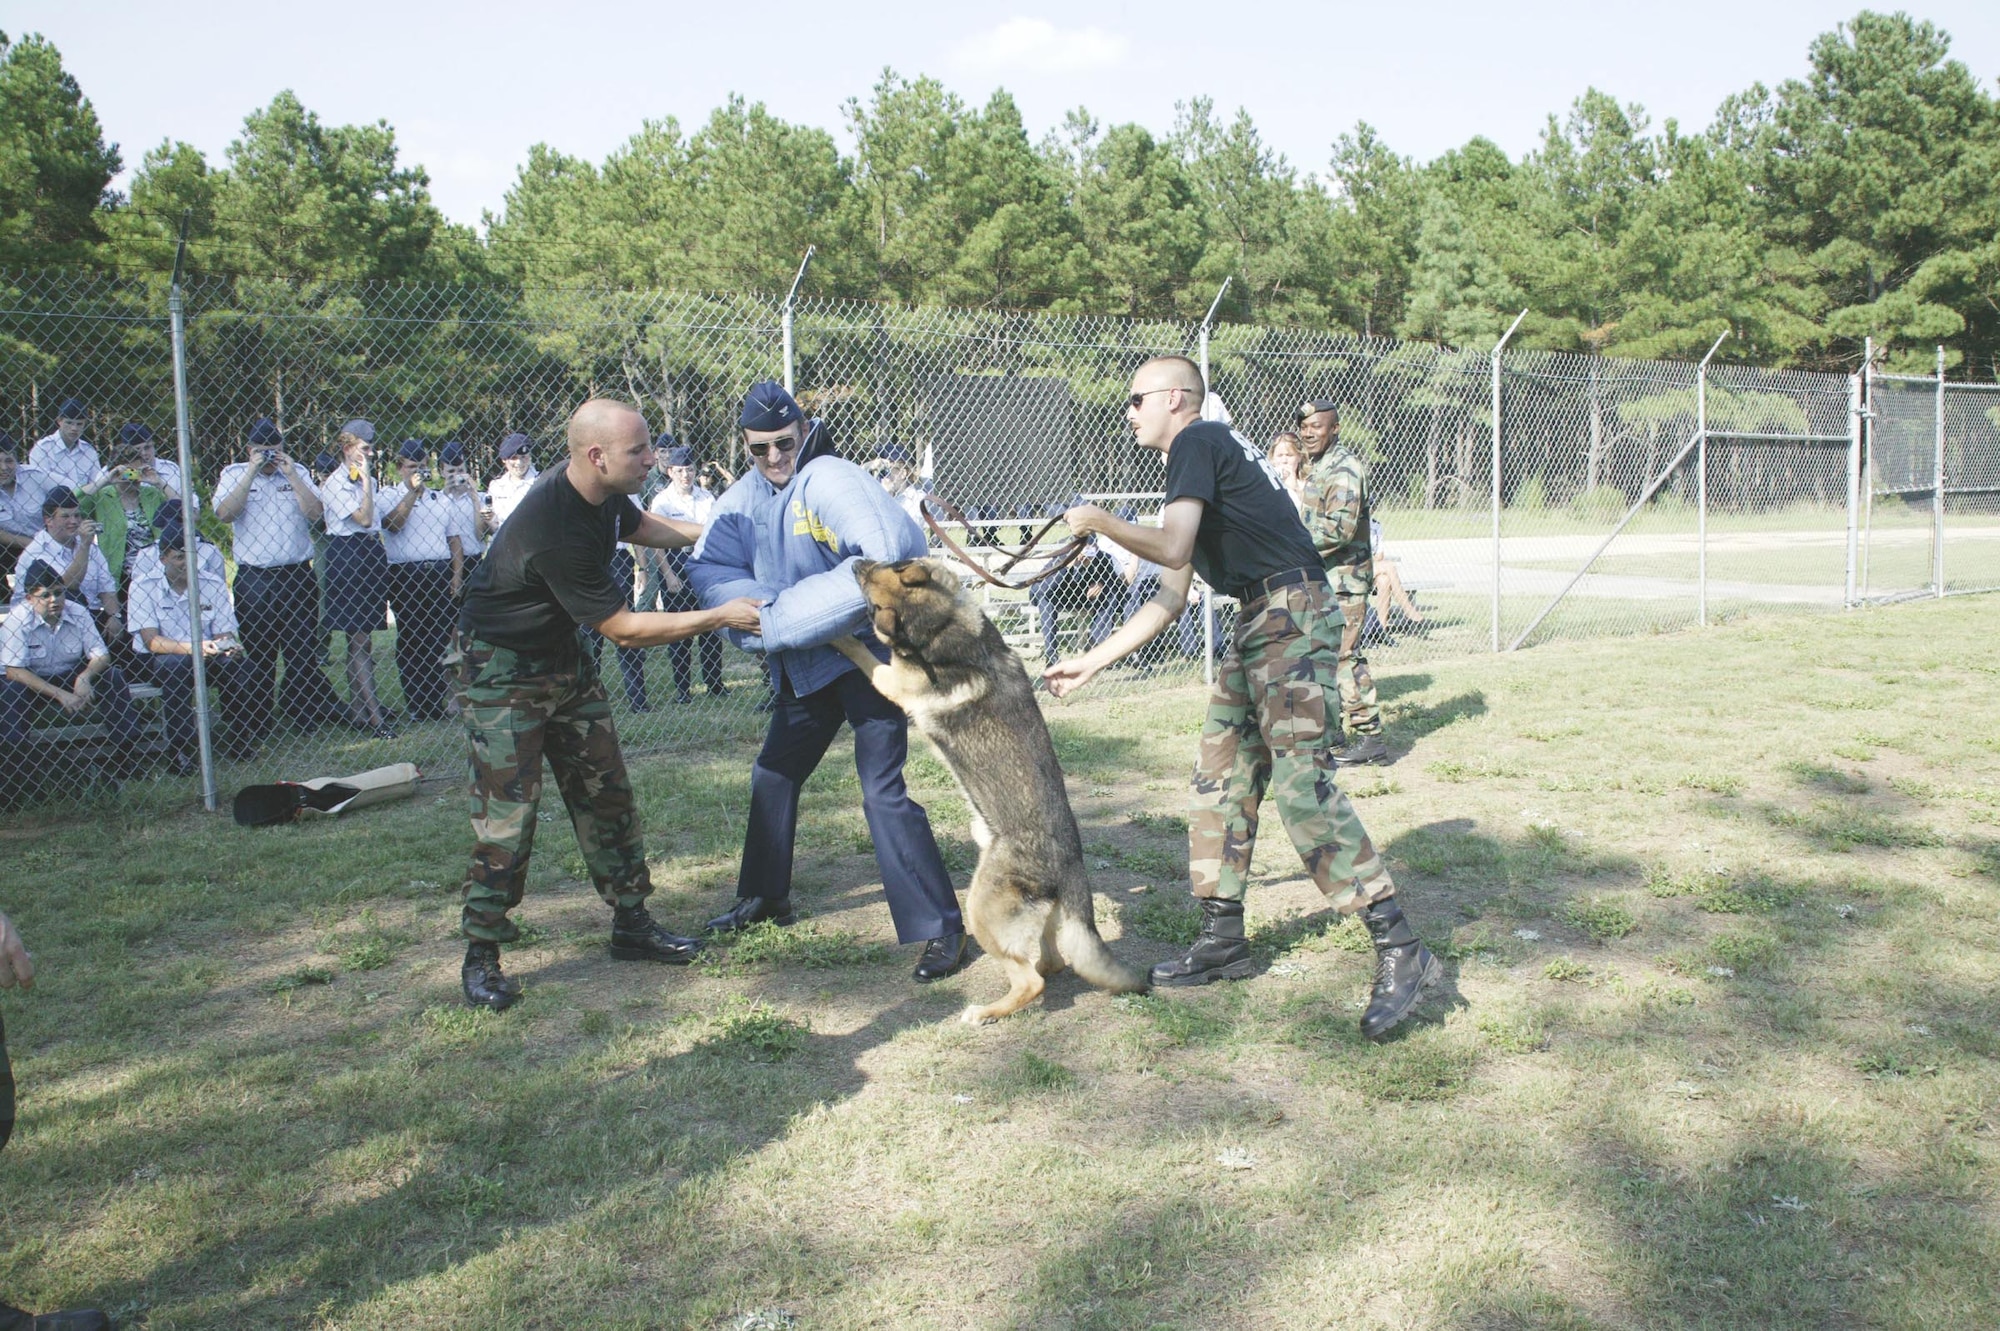 SHAW AIR FORCE BASE, S.C.-- Retired Air Force Col. Larry Swann, Midview High School AF JROTC instructor, “gets bit” during a military working dog demonstration Sept. 15. Col. Swann and more than 80 cadets from Grafton, Ohio, came to tour the base. Their tour was hosted by Capt. Jason Barta, 79th Fighter Squadron pilot.  (U.S. Air Force photo/Senior Airman Holly MacDonald)